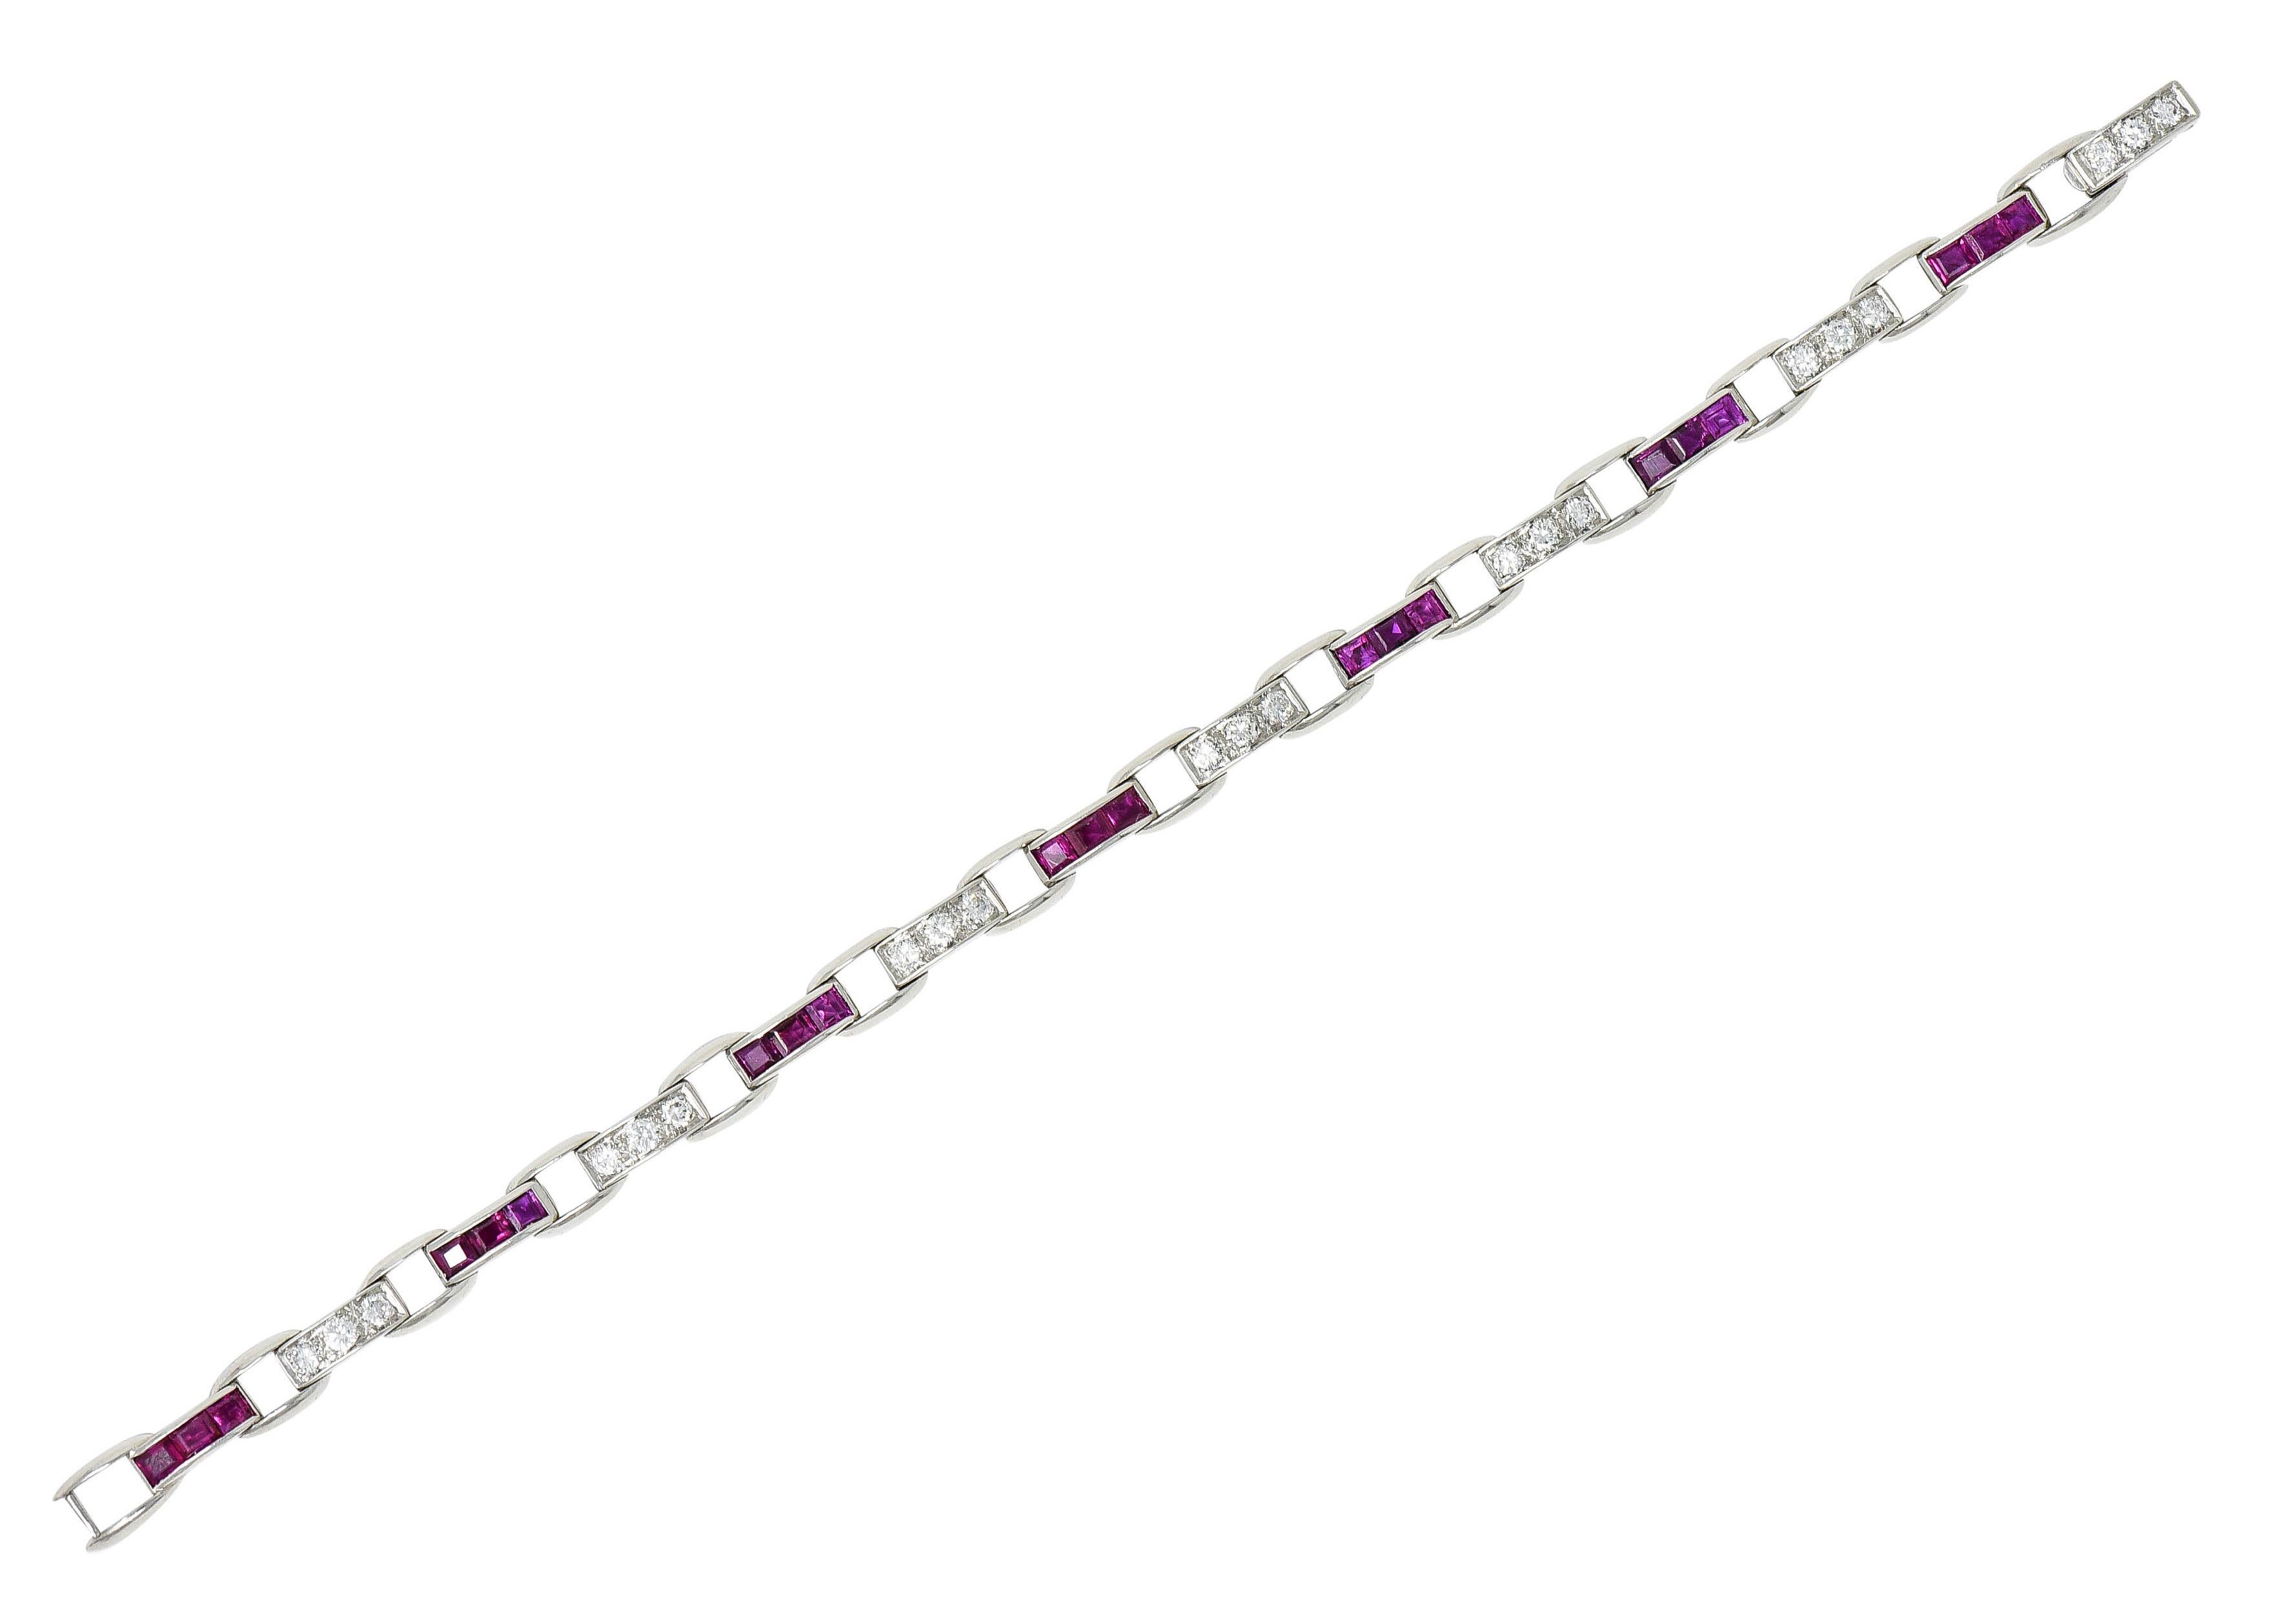 Bracelet is comprised of stylized buckle links

With rows of channel set rubies alternating with bead set round brilliant cut diamonds

Rubies are strongly purplish red while weighing in total approximately 3.00 carats

While diamonds weigh in total